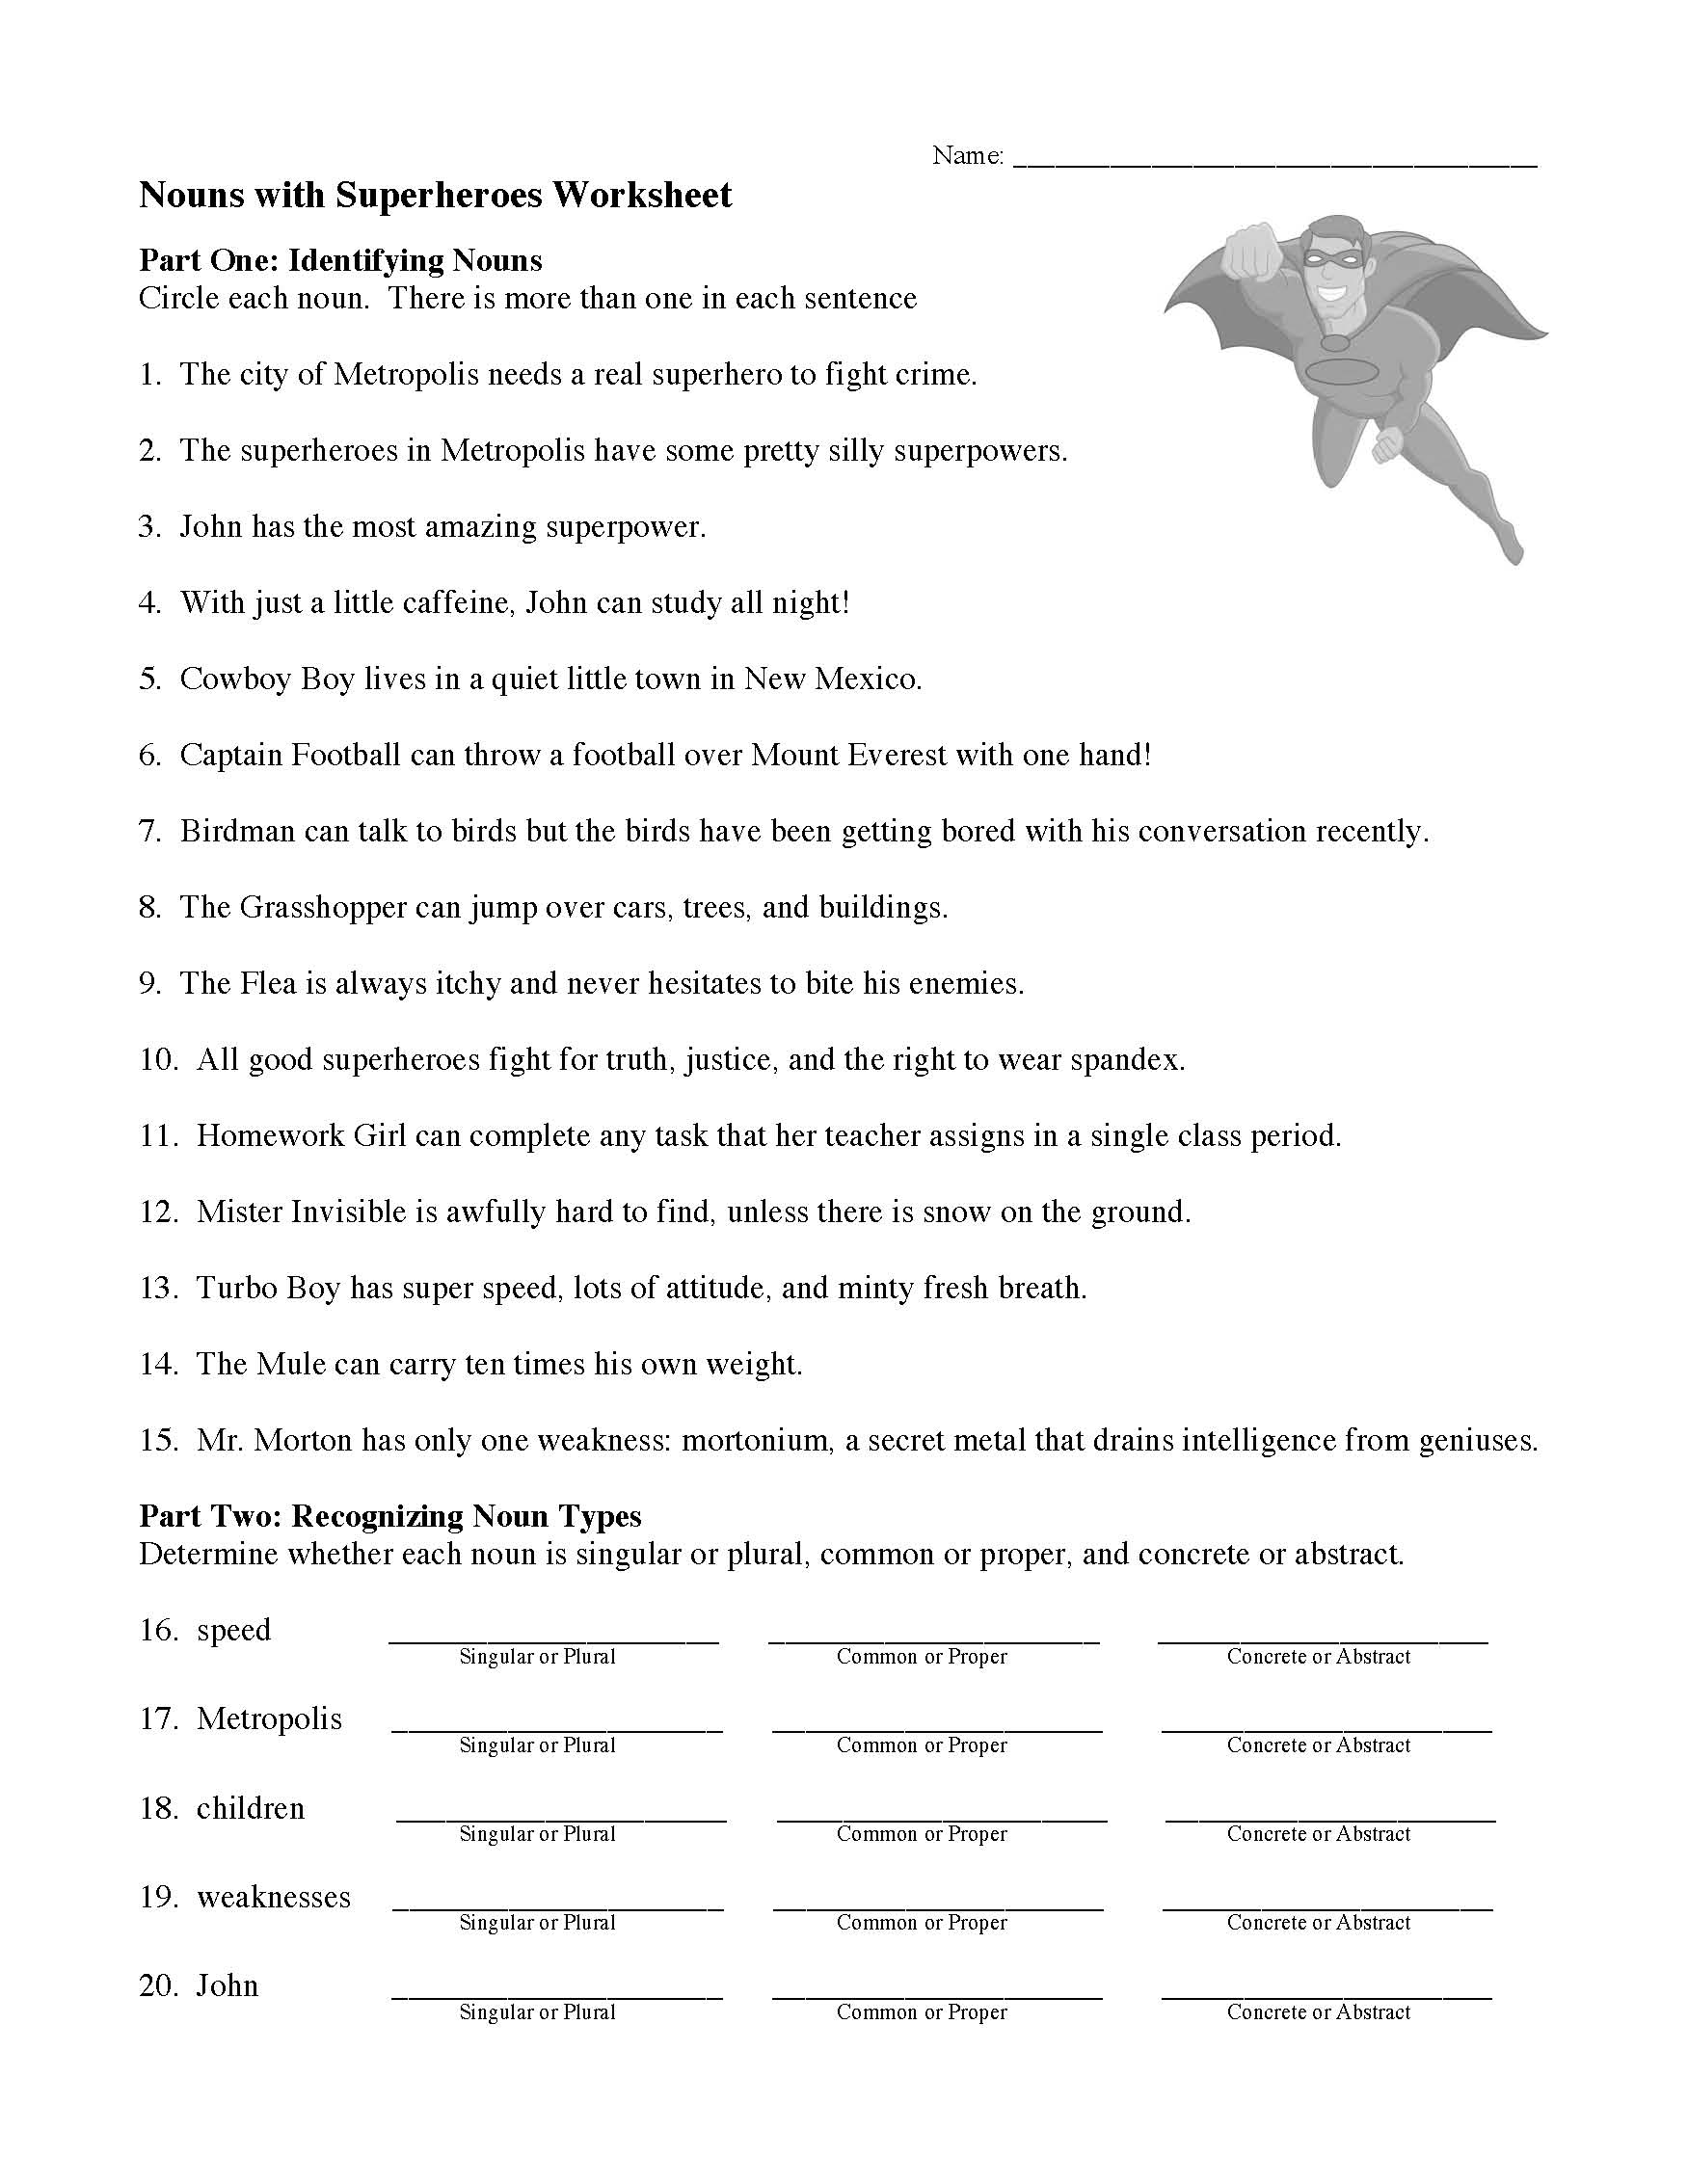 noun-worksheets-lessons-and-tests-parts-of-speech-activities